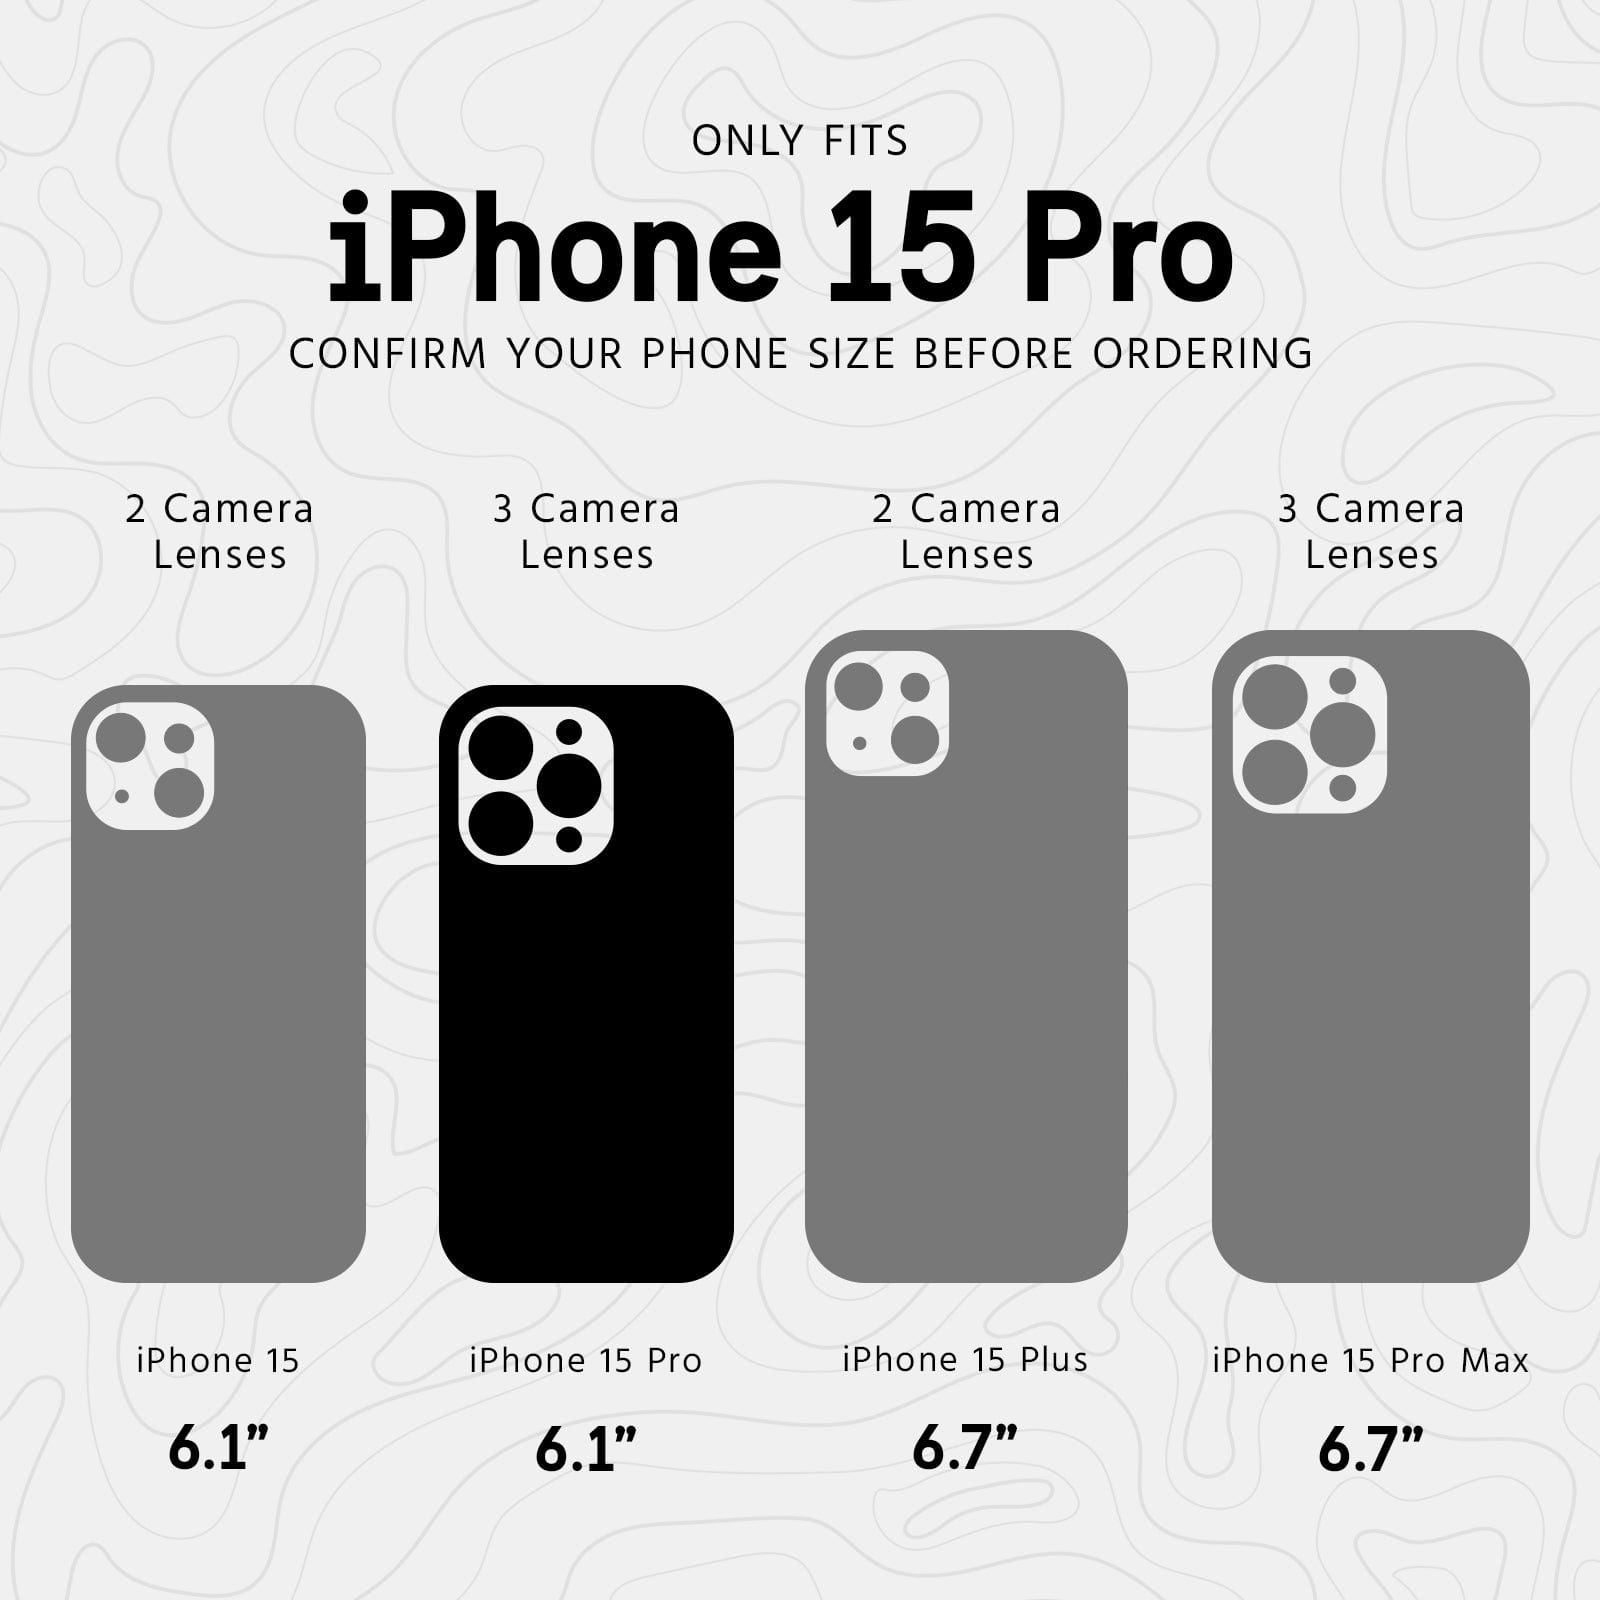 ONLY FITS IPHONE 15 PRO. CONFIRM YOUR DEVICE BEFORE ORDERING